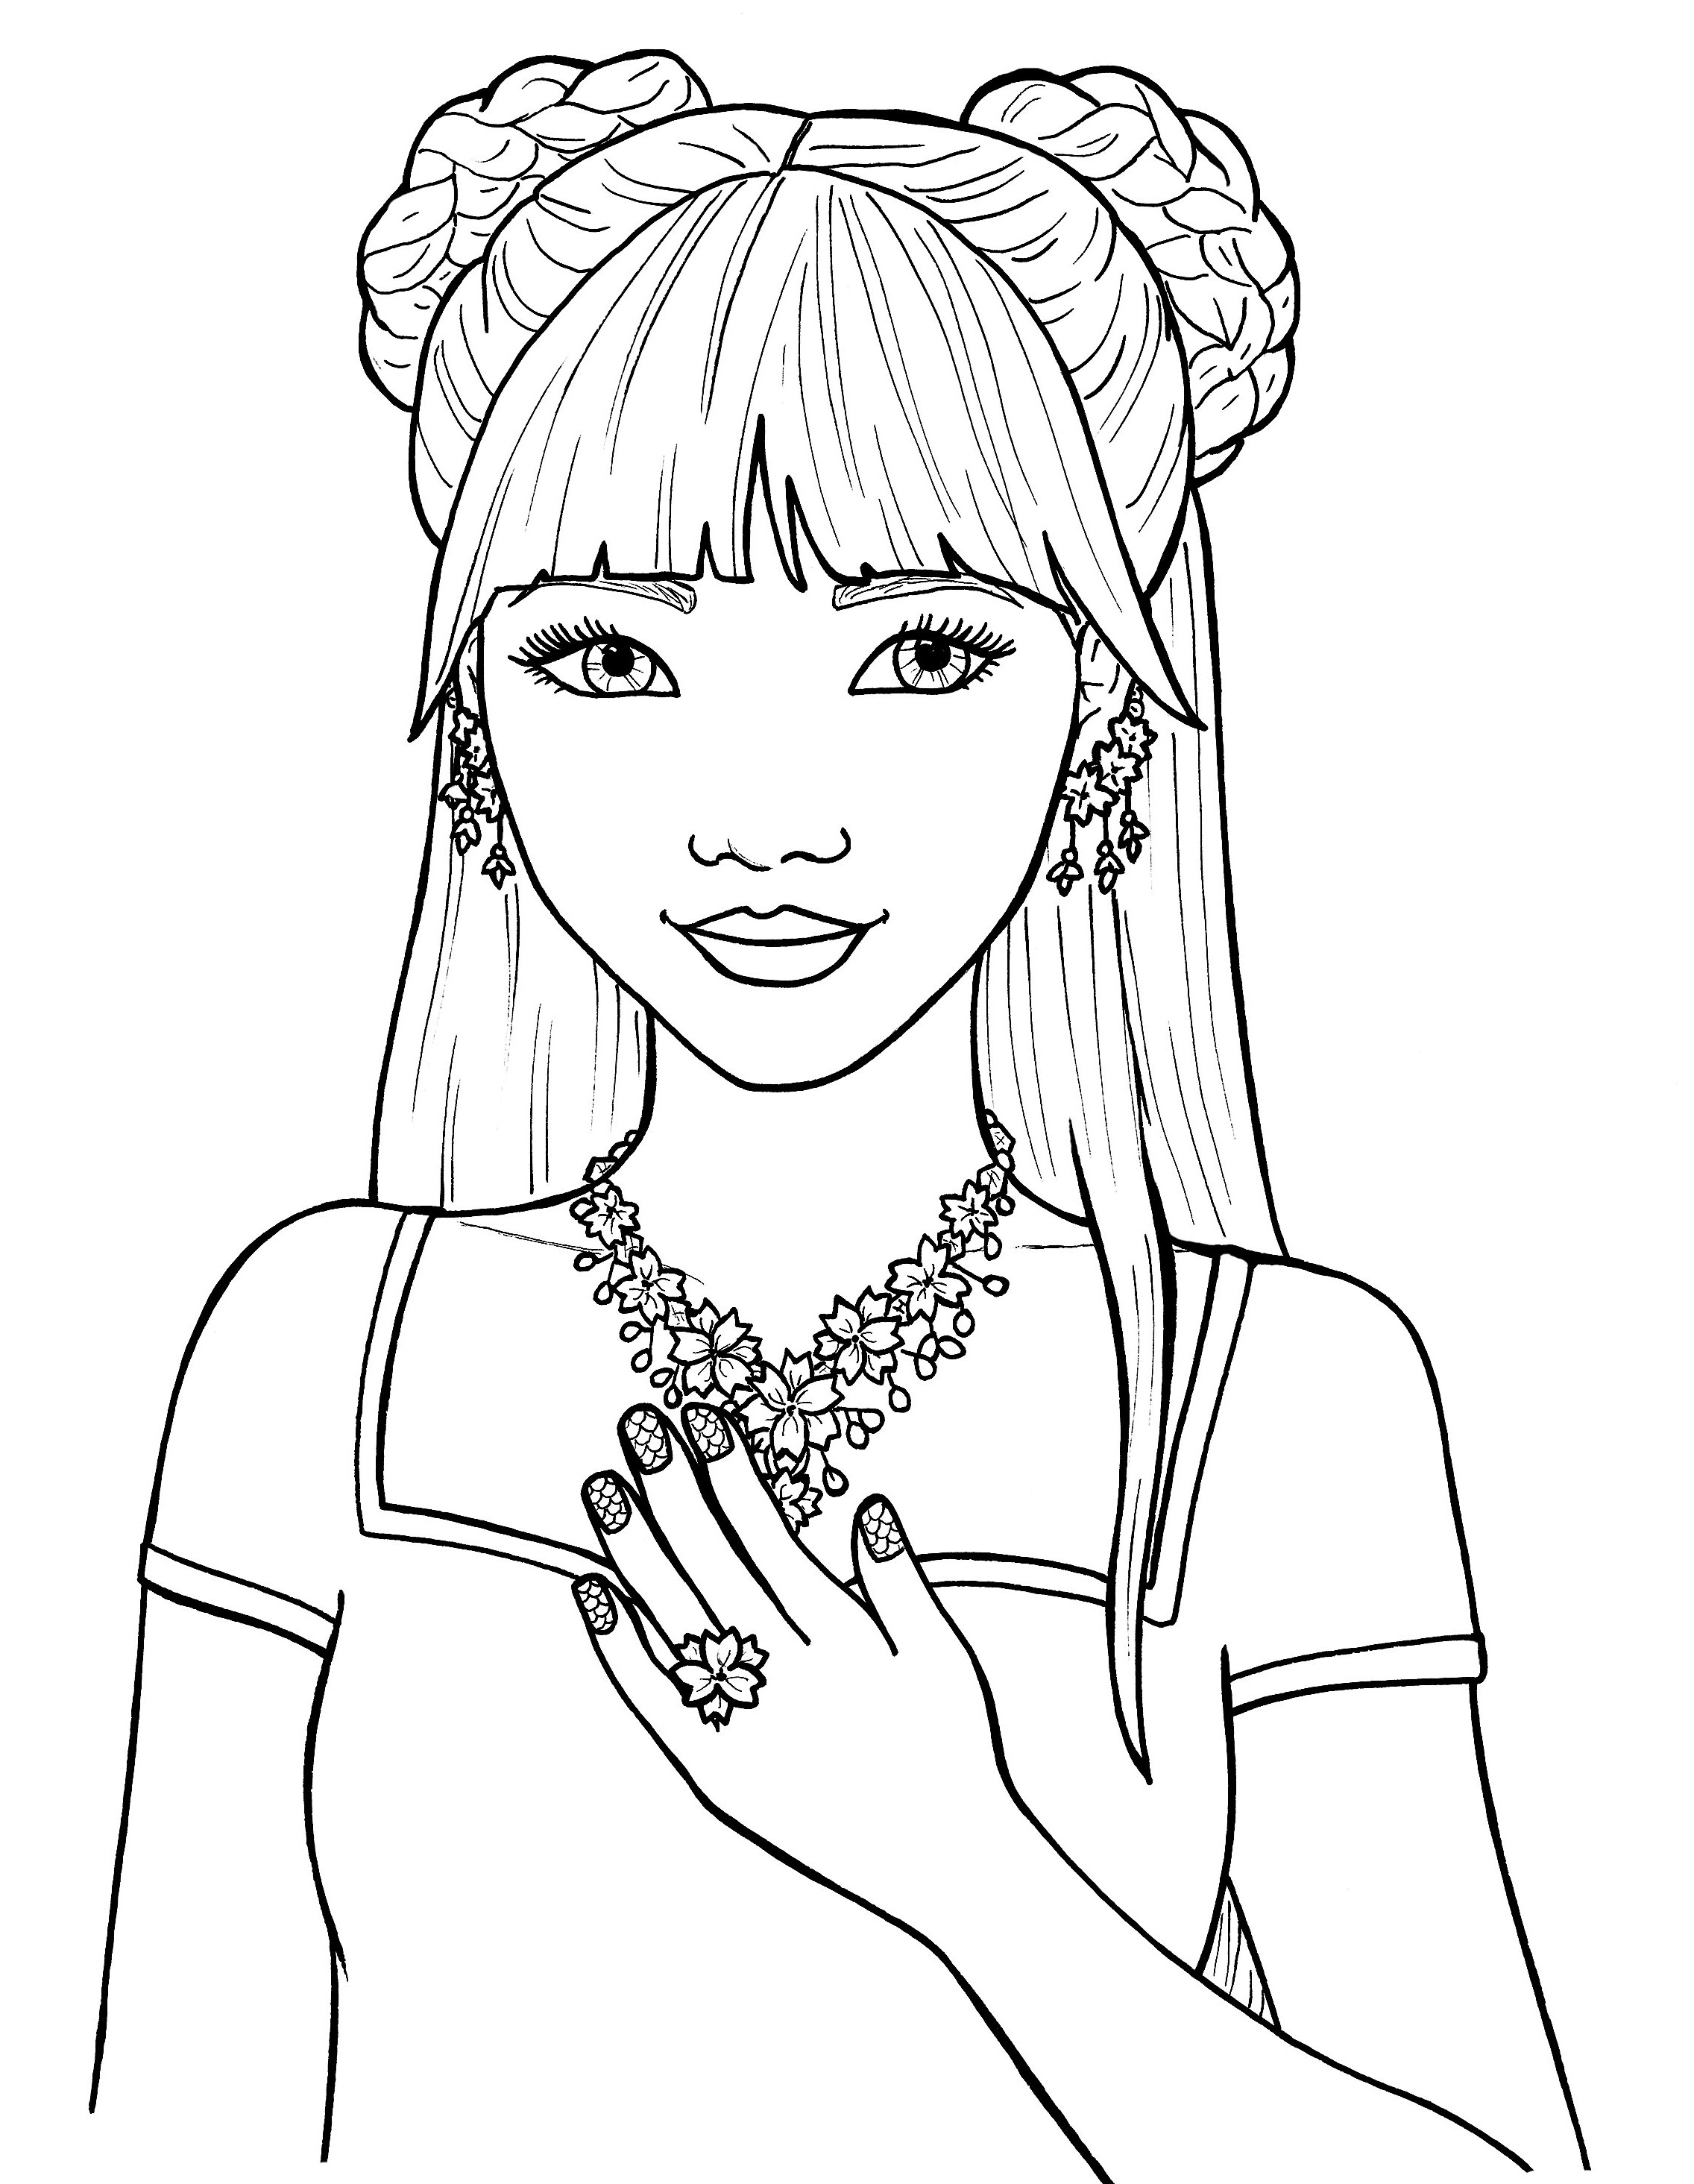 Printable Coloring Pages For Girls at GetColoringscom